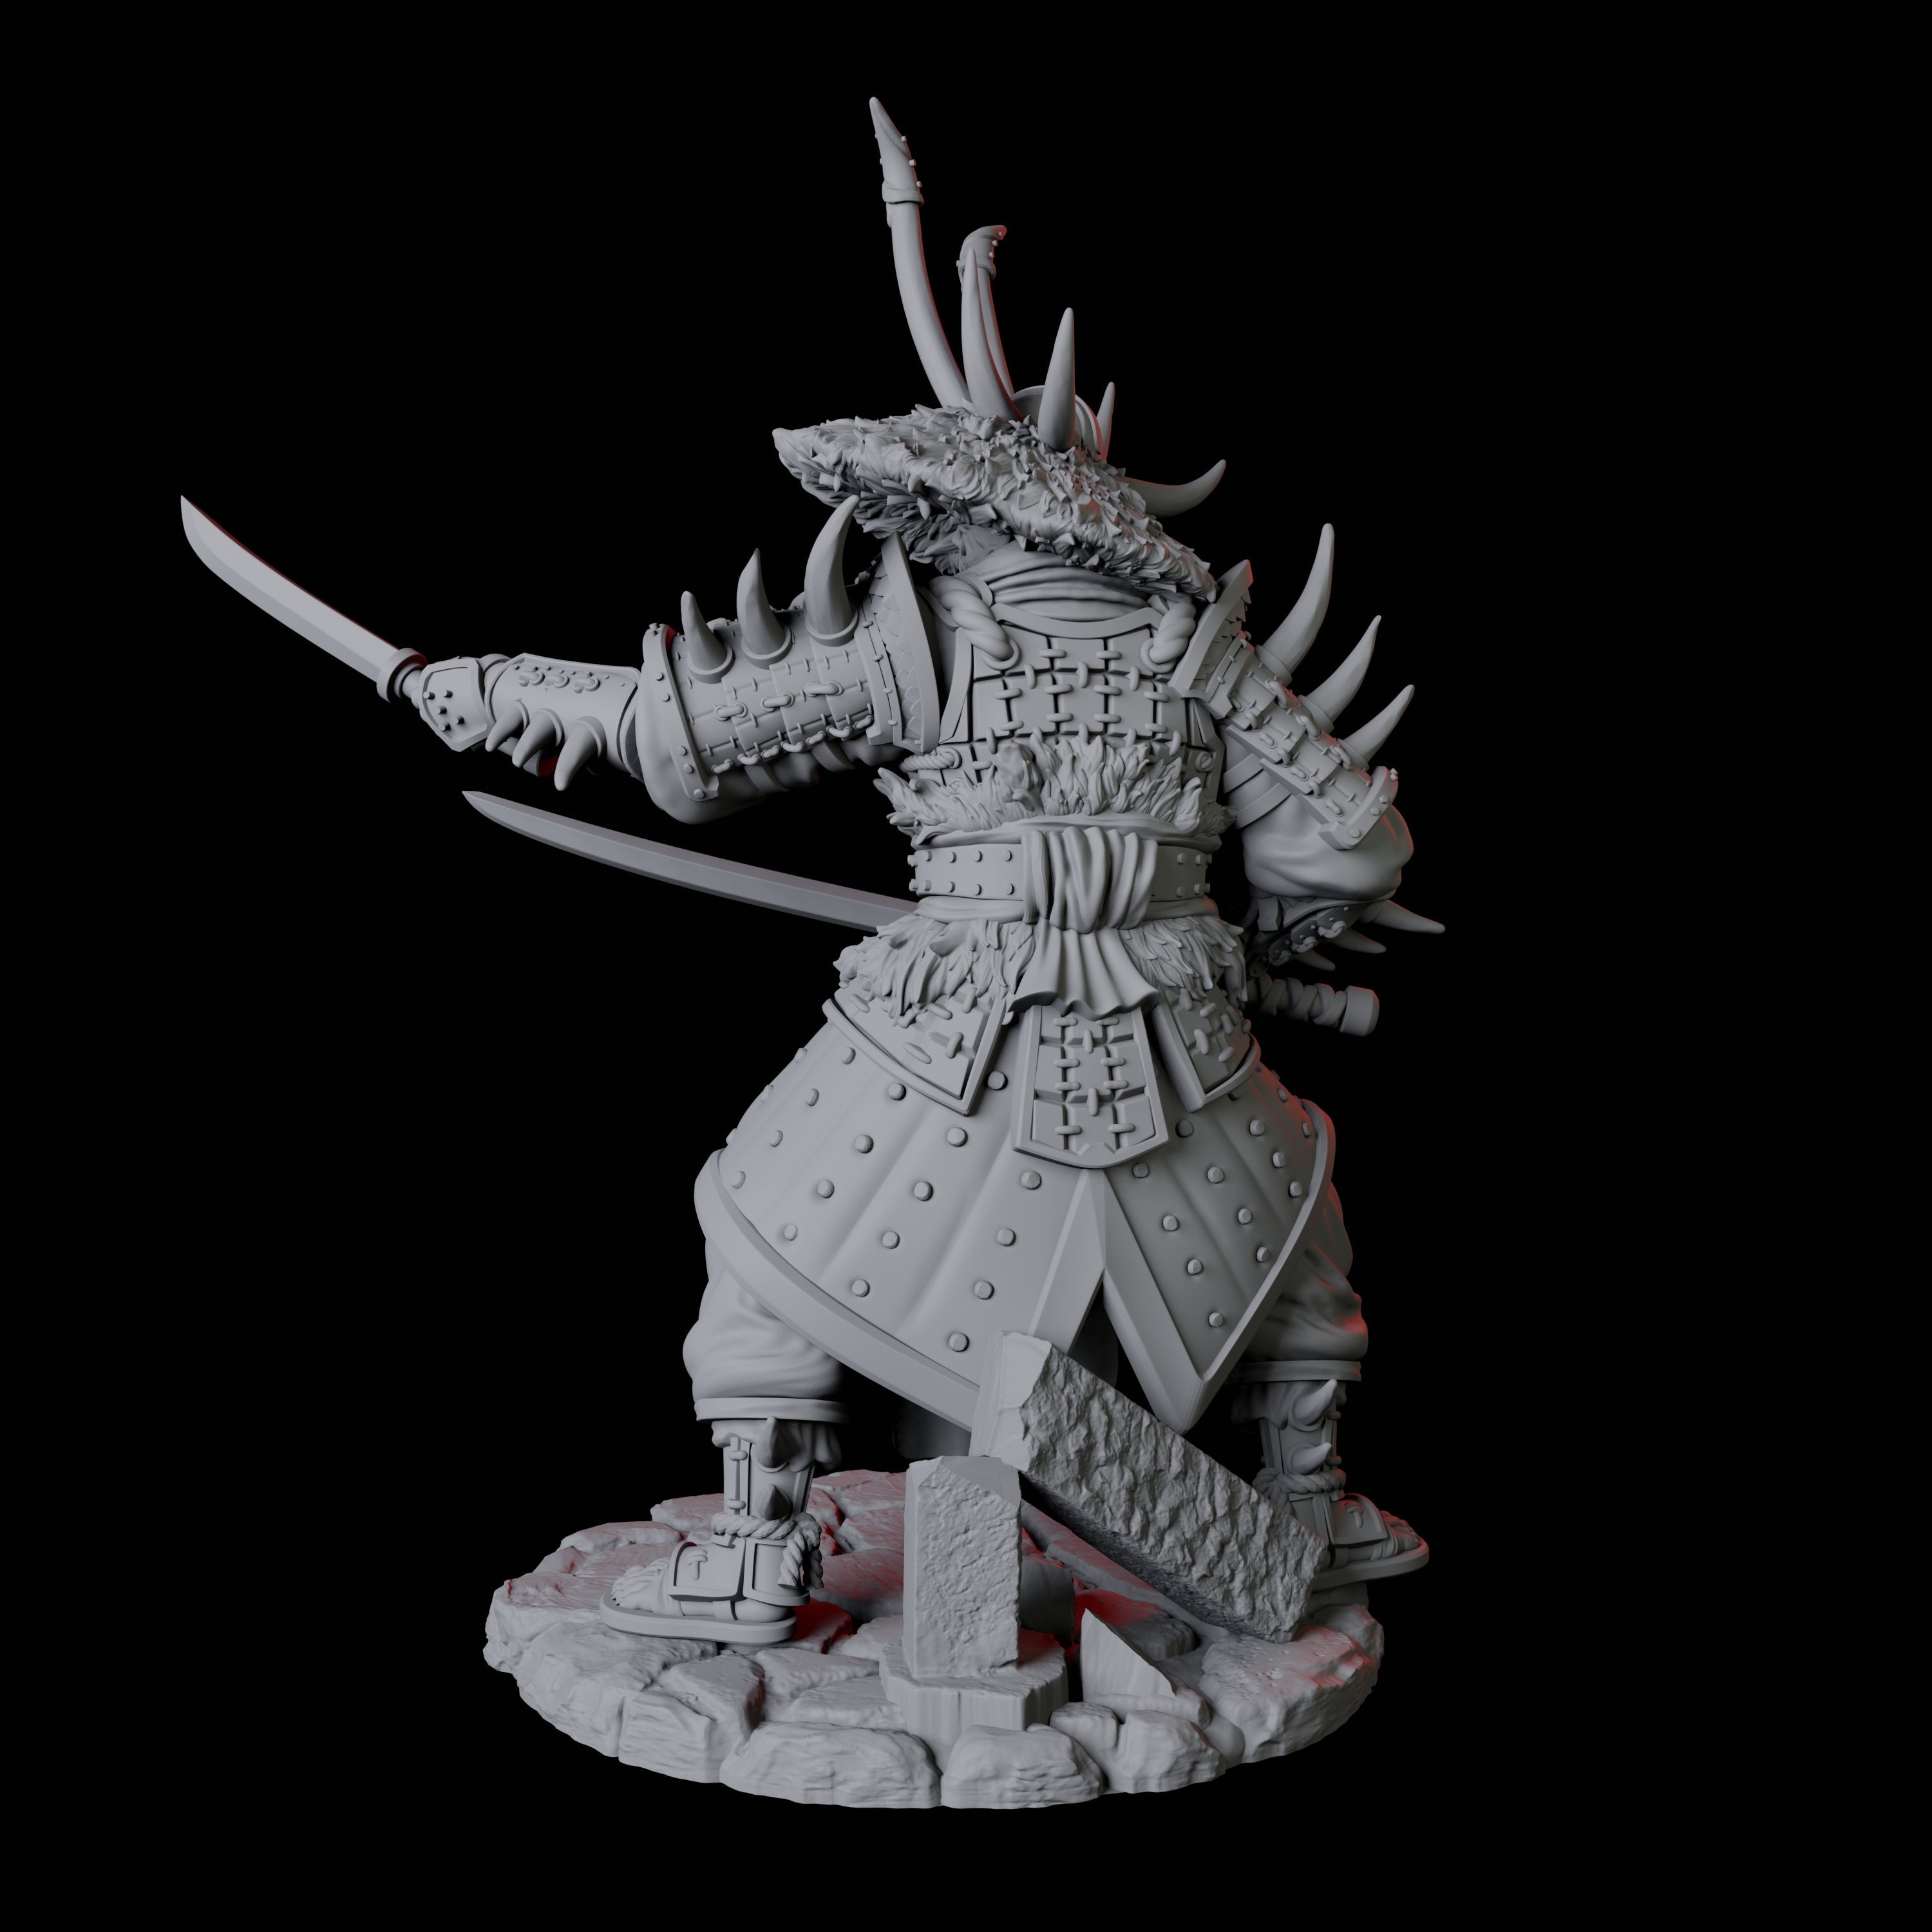 Oni Death Samurai A Miniature for Dungeons and Dragons, Pathfinder or other TTRPGs